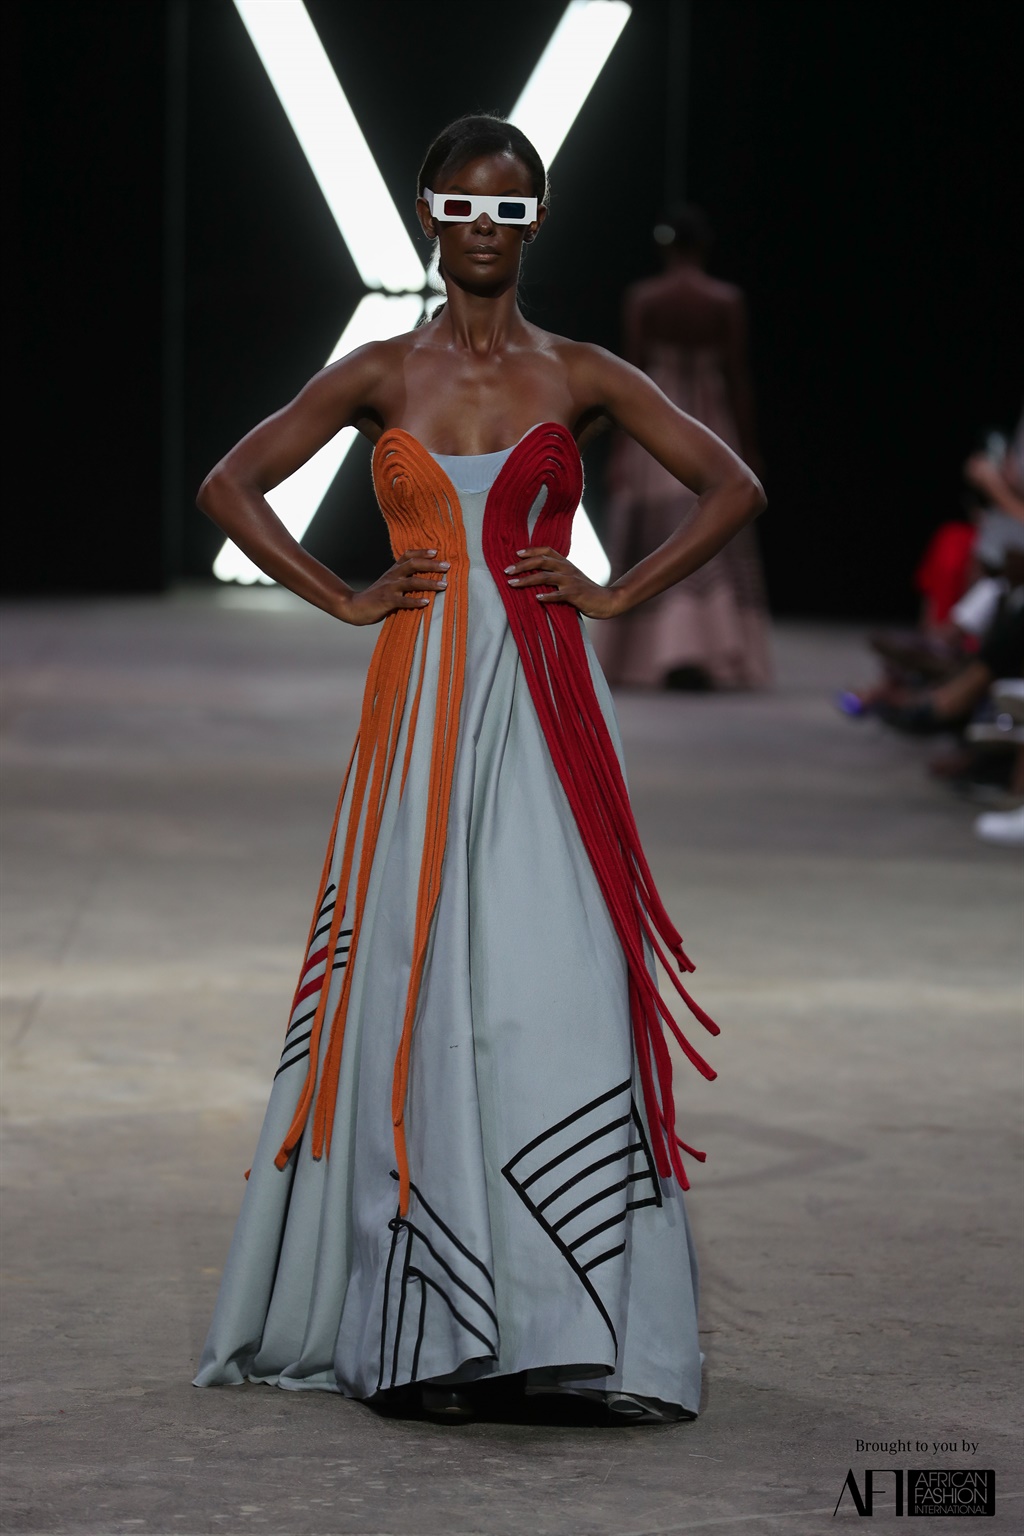 Cape Town Fashion Week just gave us the message that 'Africa is now